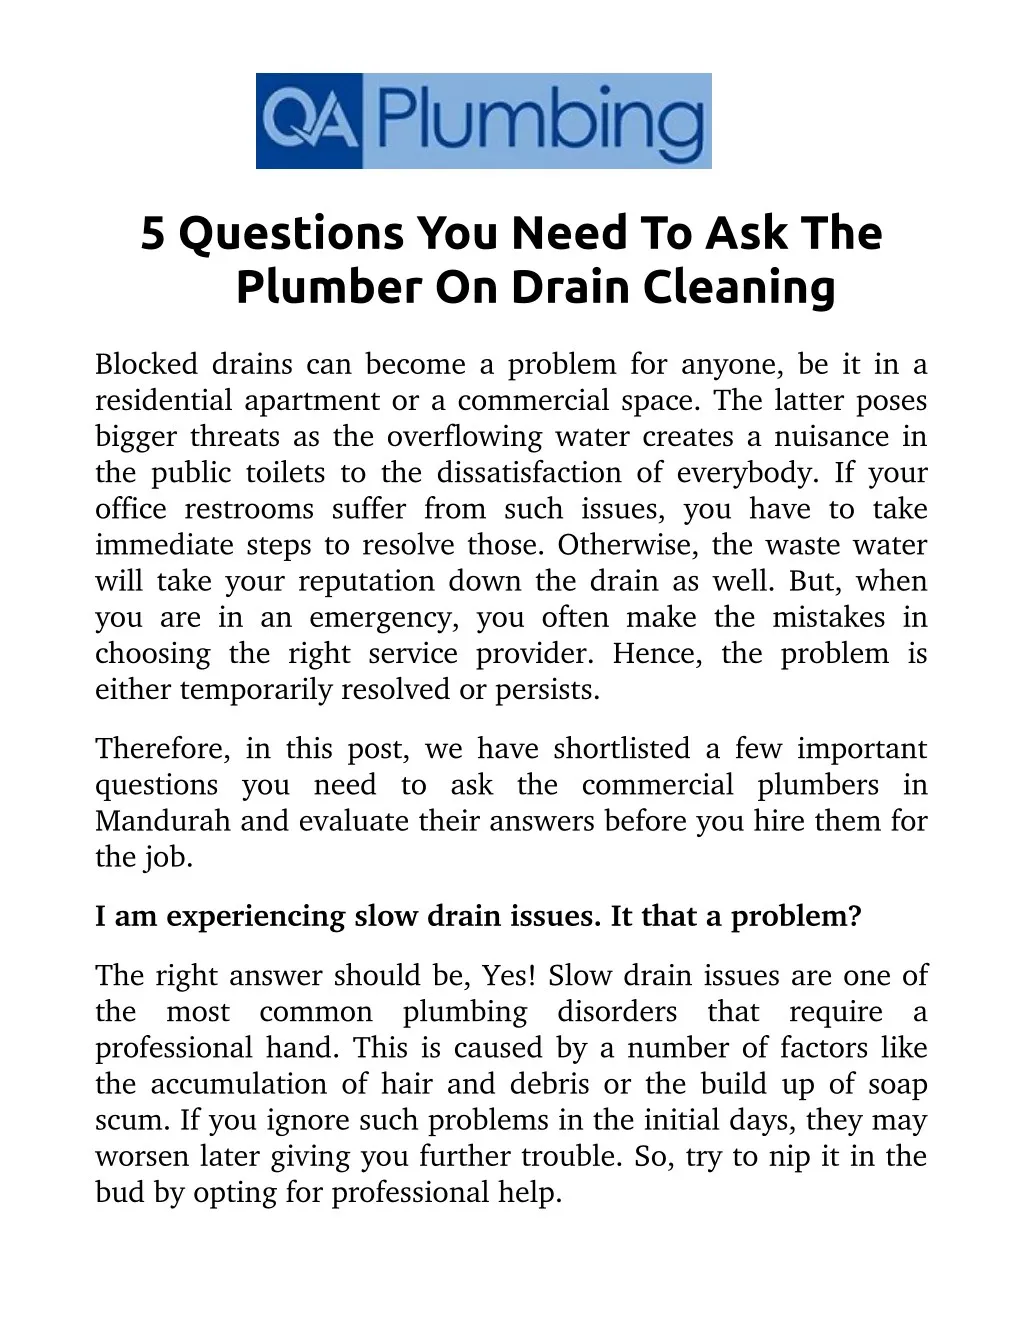 5 questions you need to ask the plumber on drain